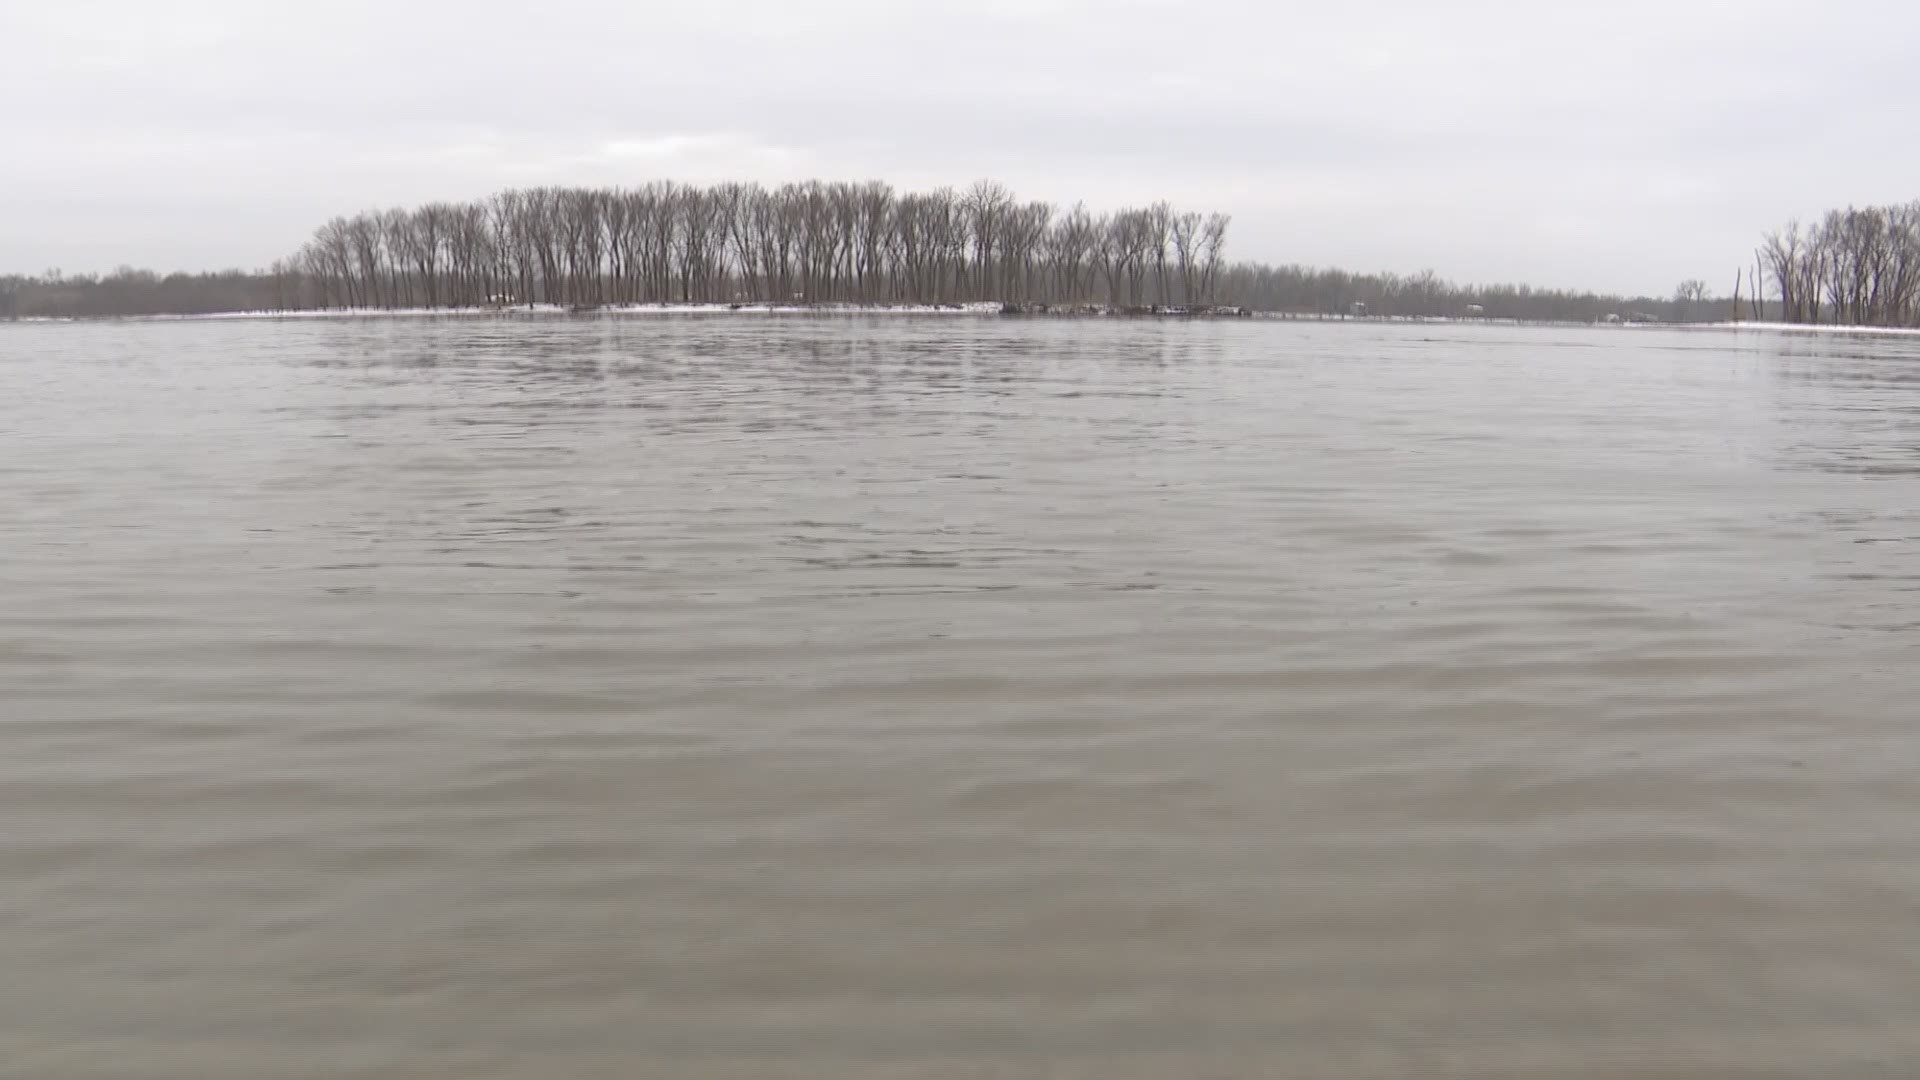 Last year's wet pattern has continued through the winter raising flood concerns